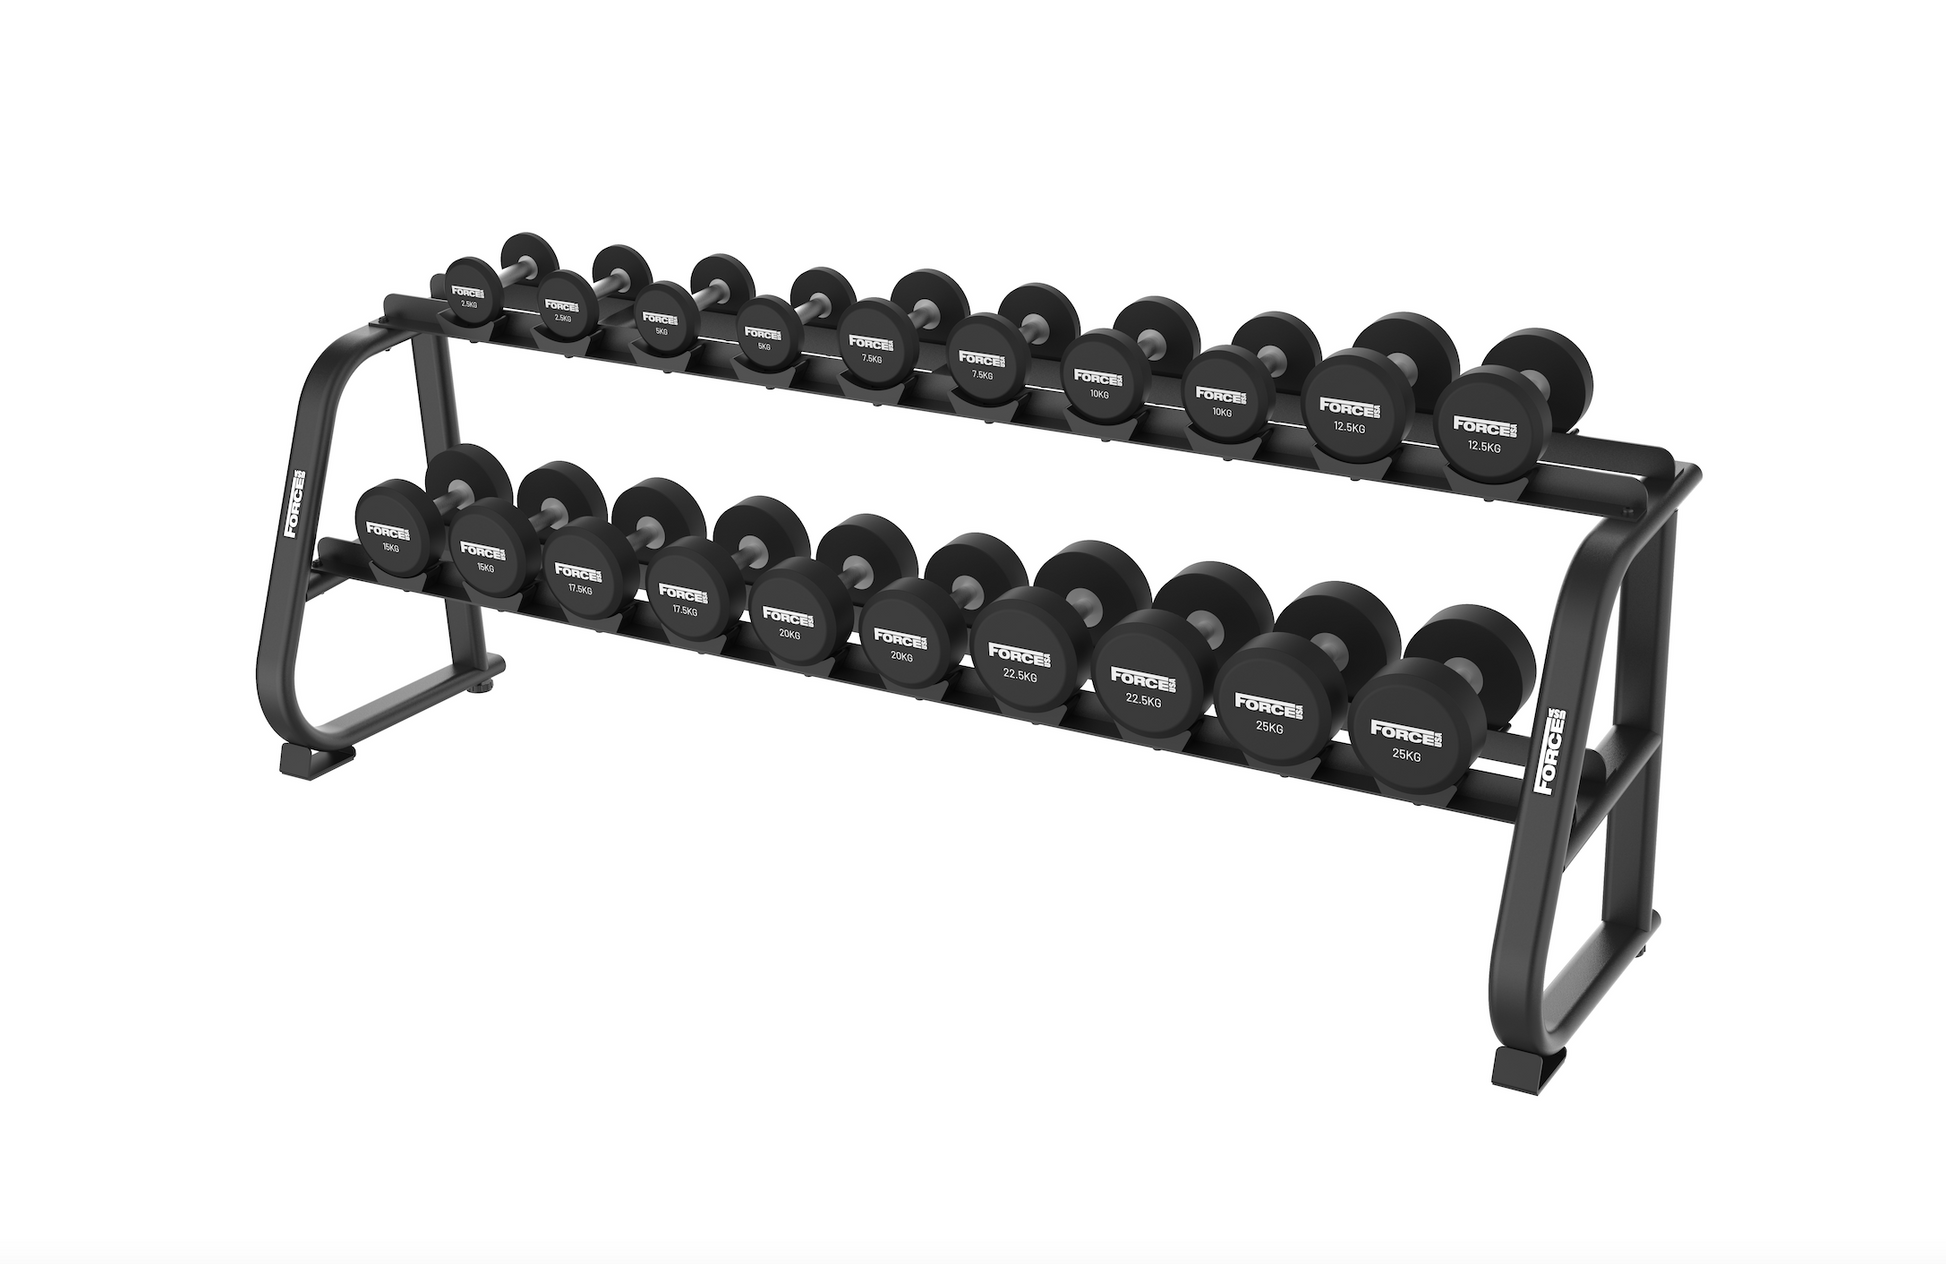 FORCE USA Commercial Round Dumbbells set with 2 Tier rack